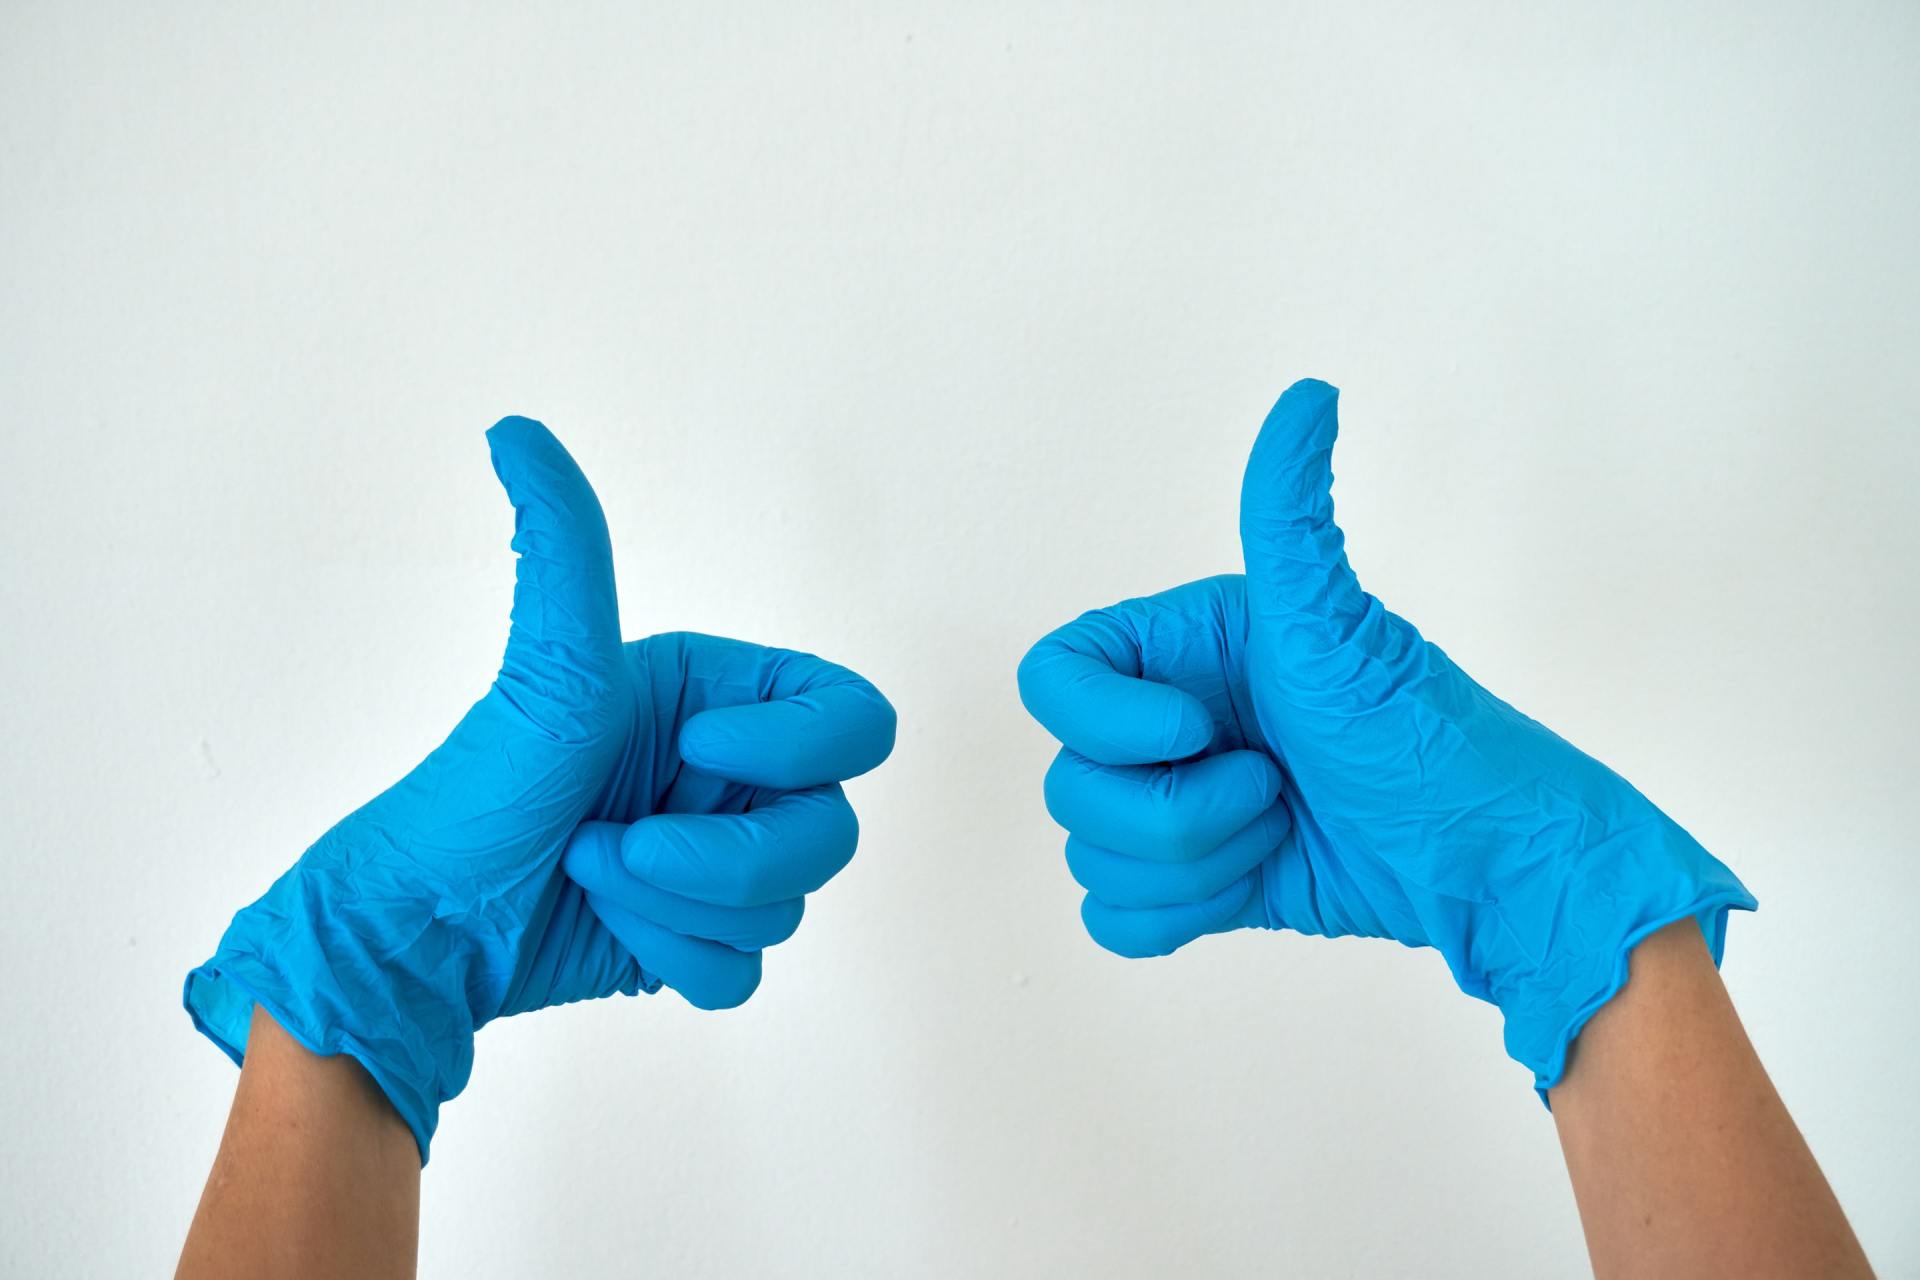 Image of two thumbs up wearing gloves during COVID-19